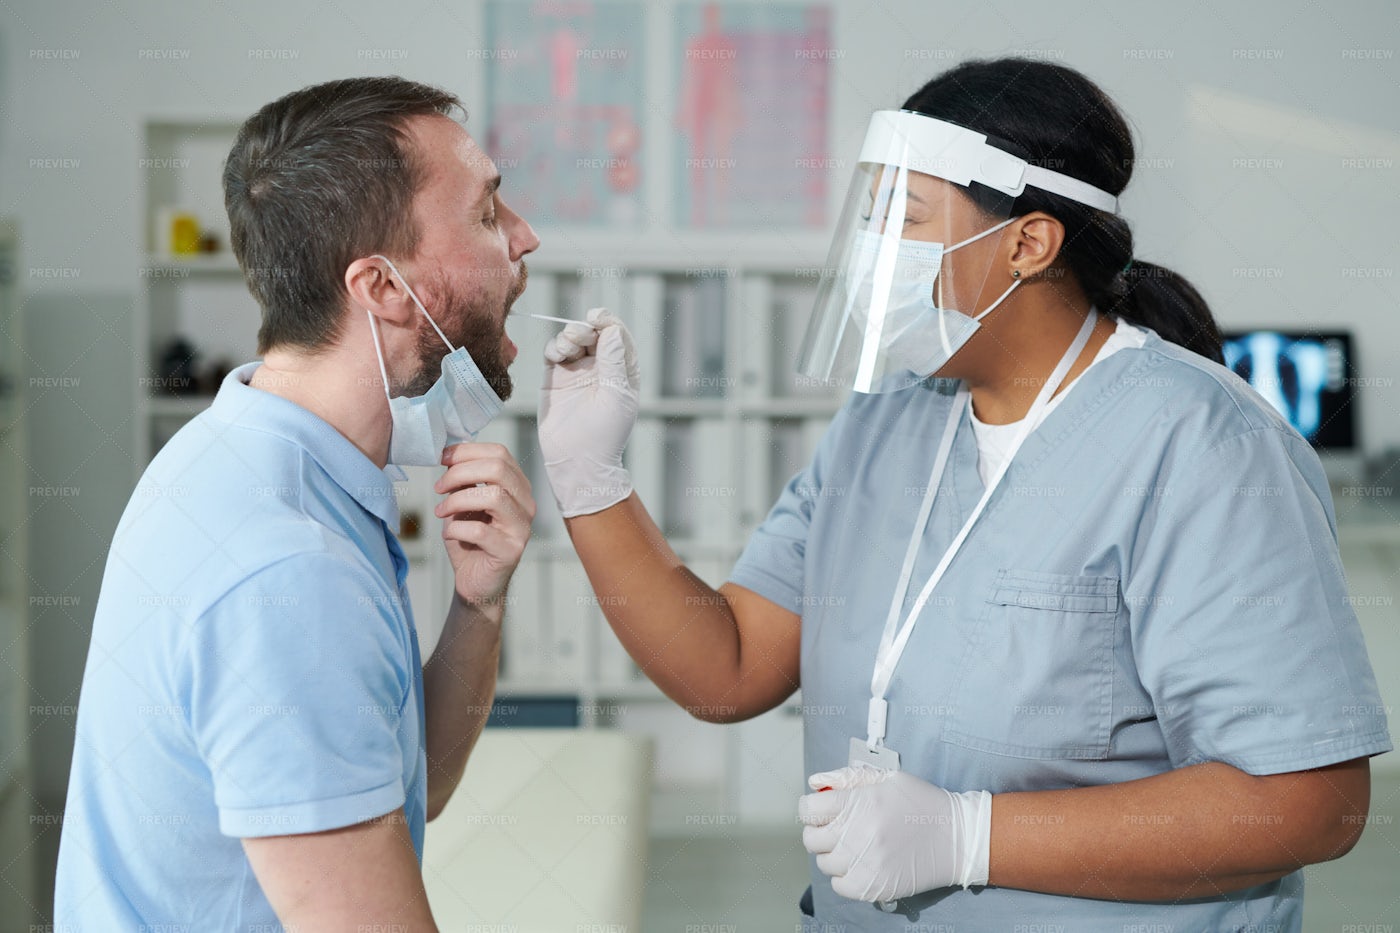 Man Being Tested For Covid: Stock Photos